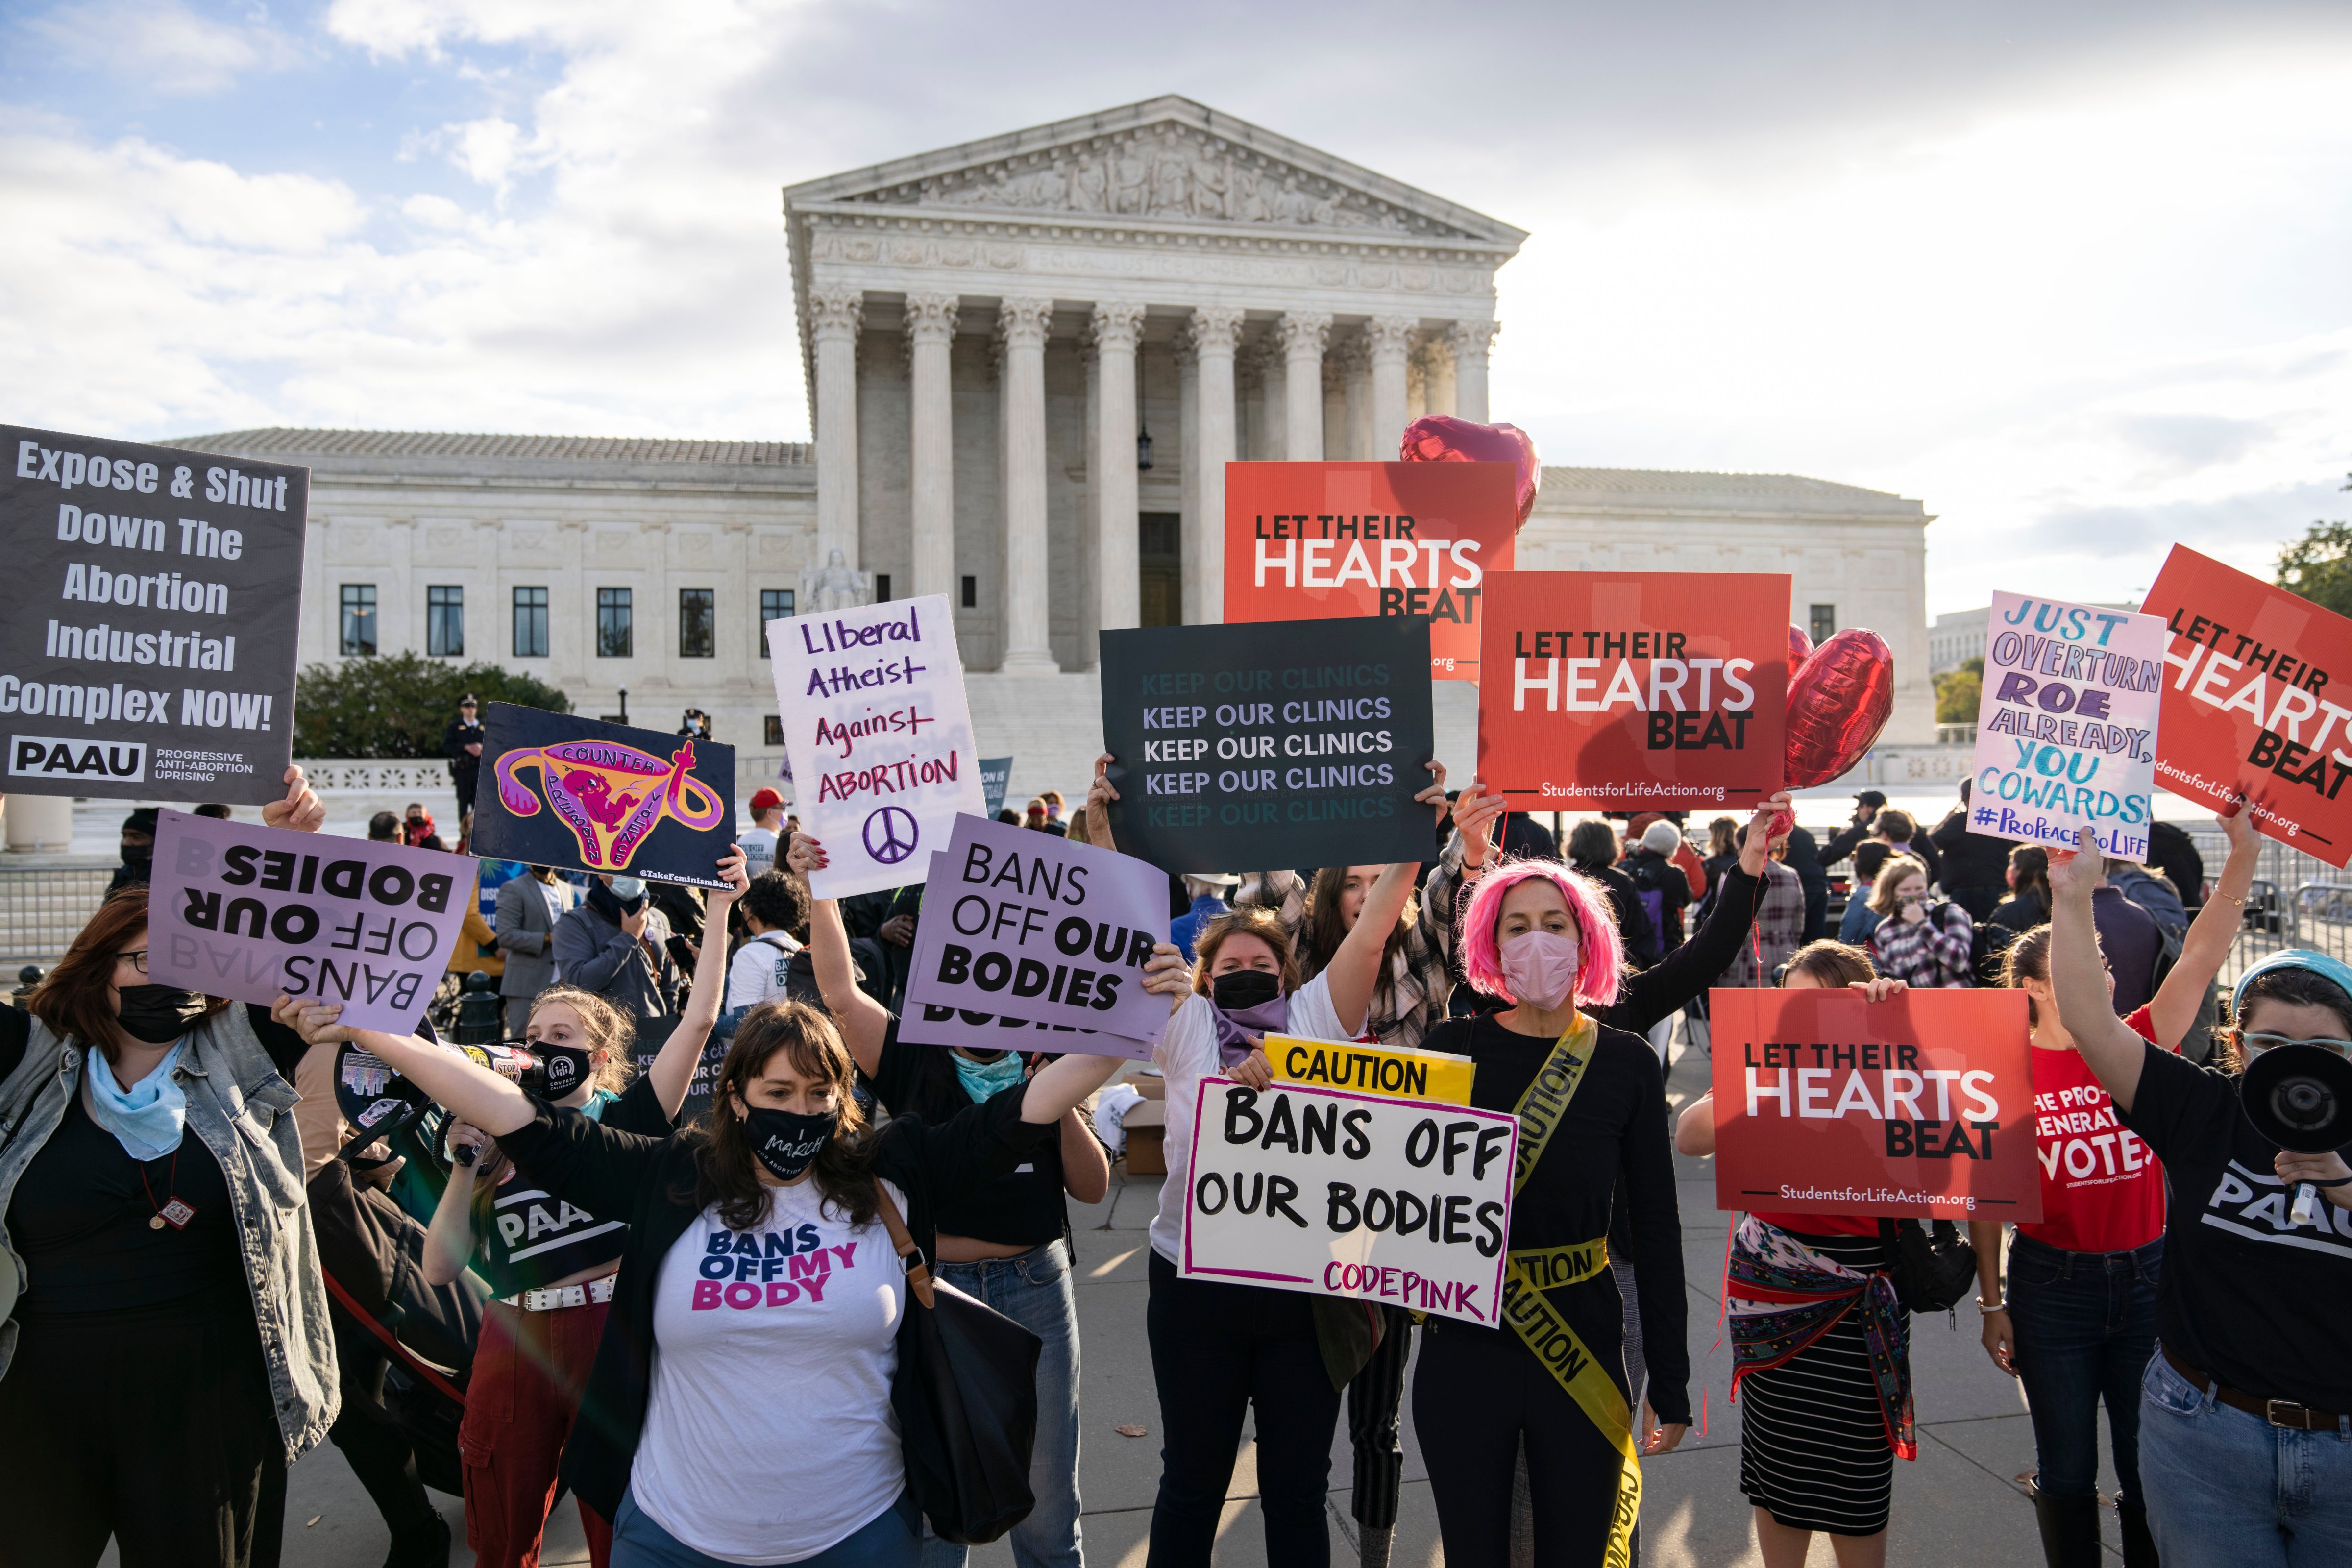 Abortion rights advocates and anti-abortion demonstrators rally outside the Supreme Court on Nov. 1, in Washington, D.C. as the Supreme Court heard arguments in a challenge to the controversial Texas abortion law which bans abortions after about six weeks. (Drew Angerer—Getty Images)